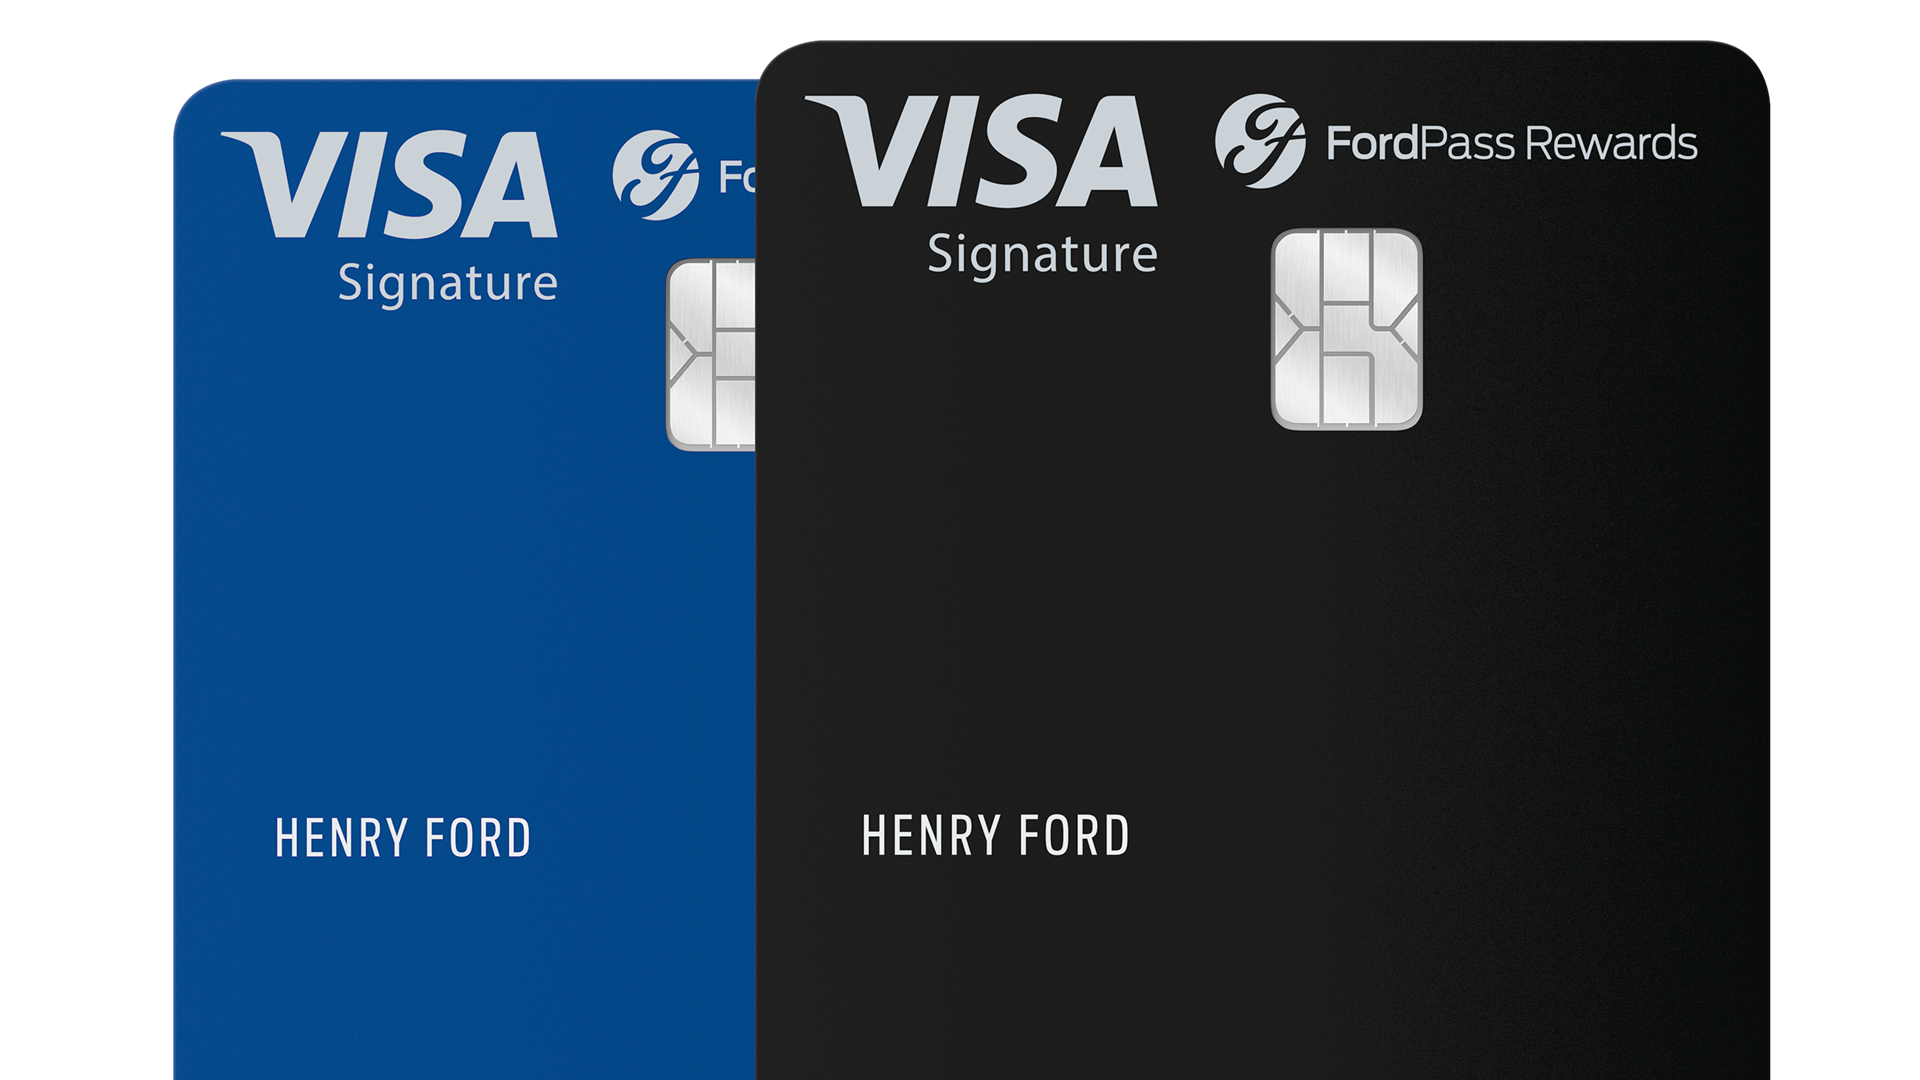 New FordPass Rewards Visa Card Is The Ultimate Card For Auto Lovers